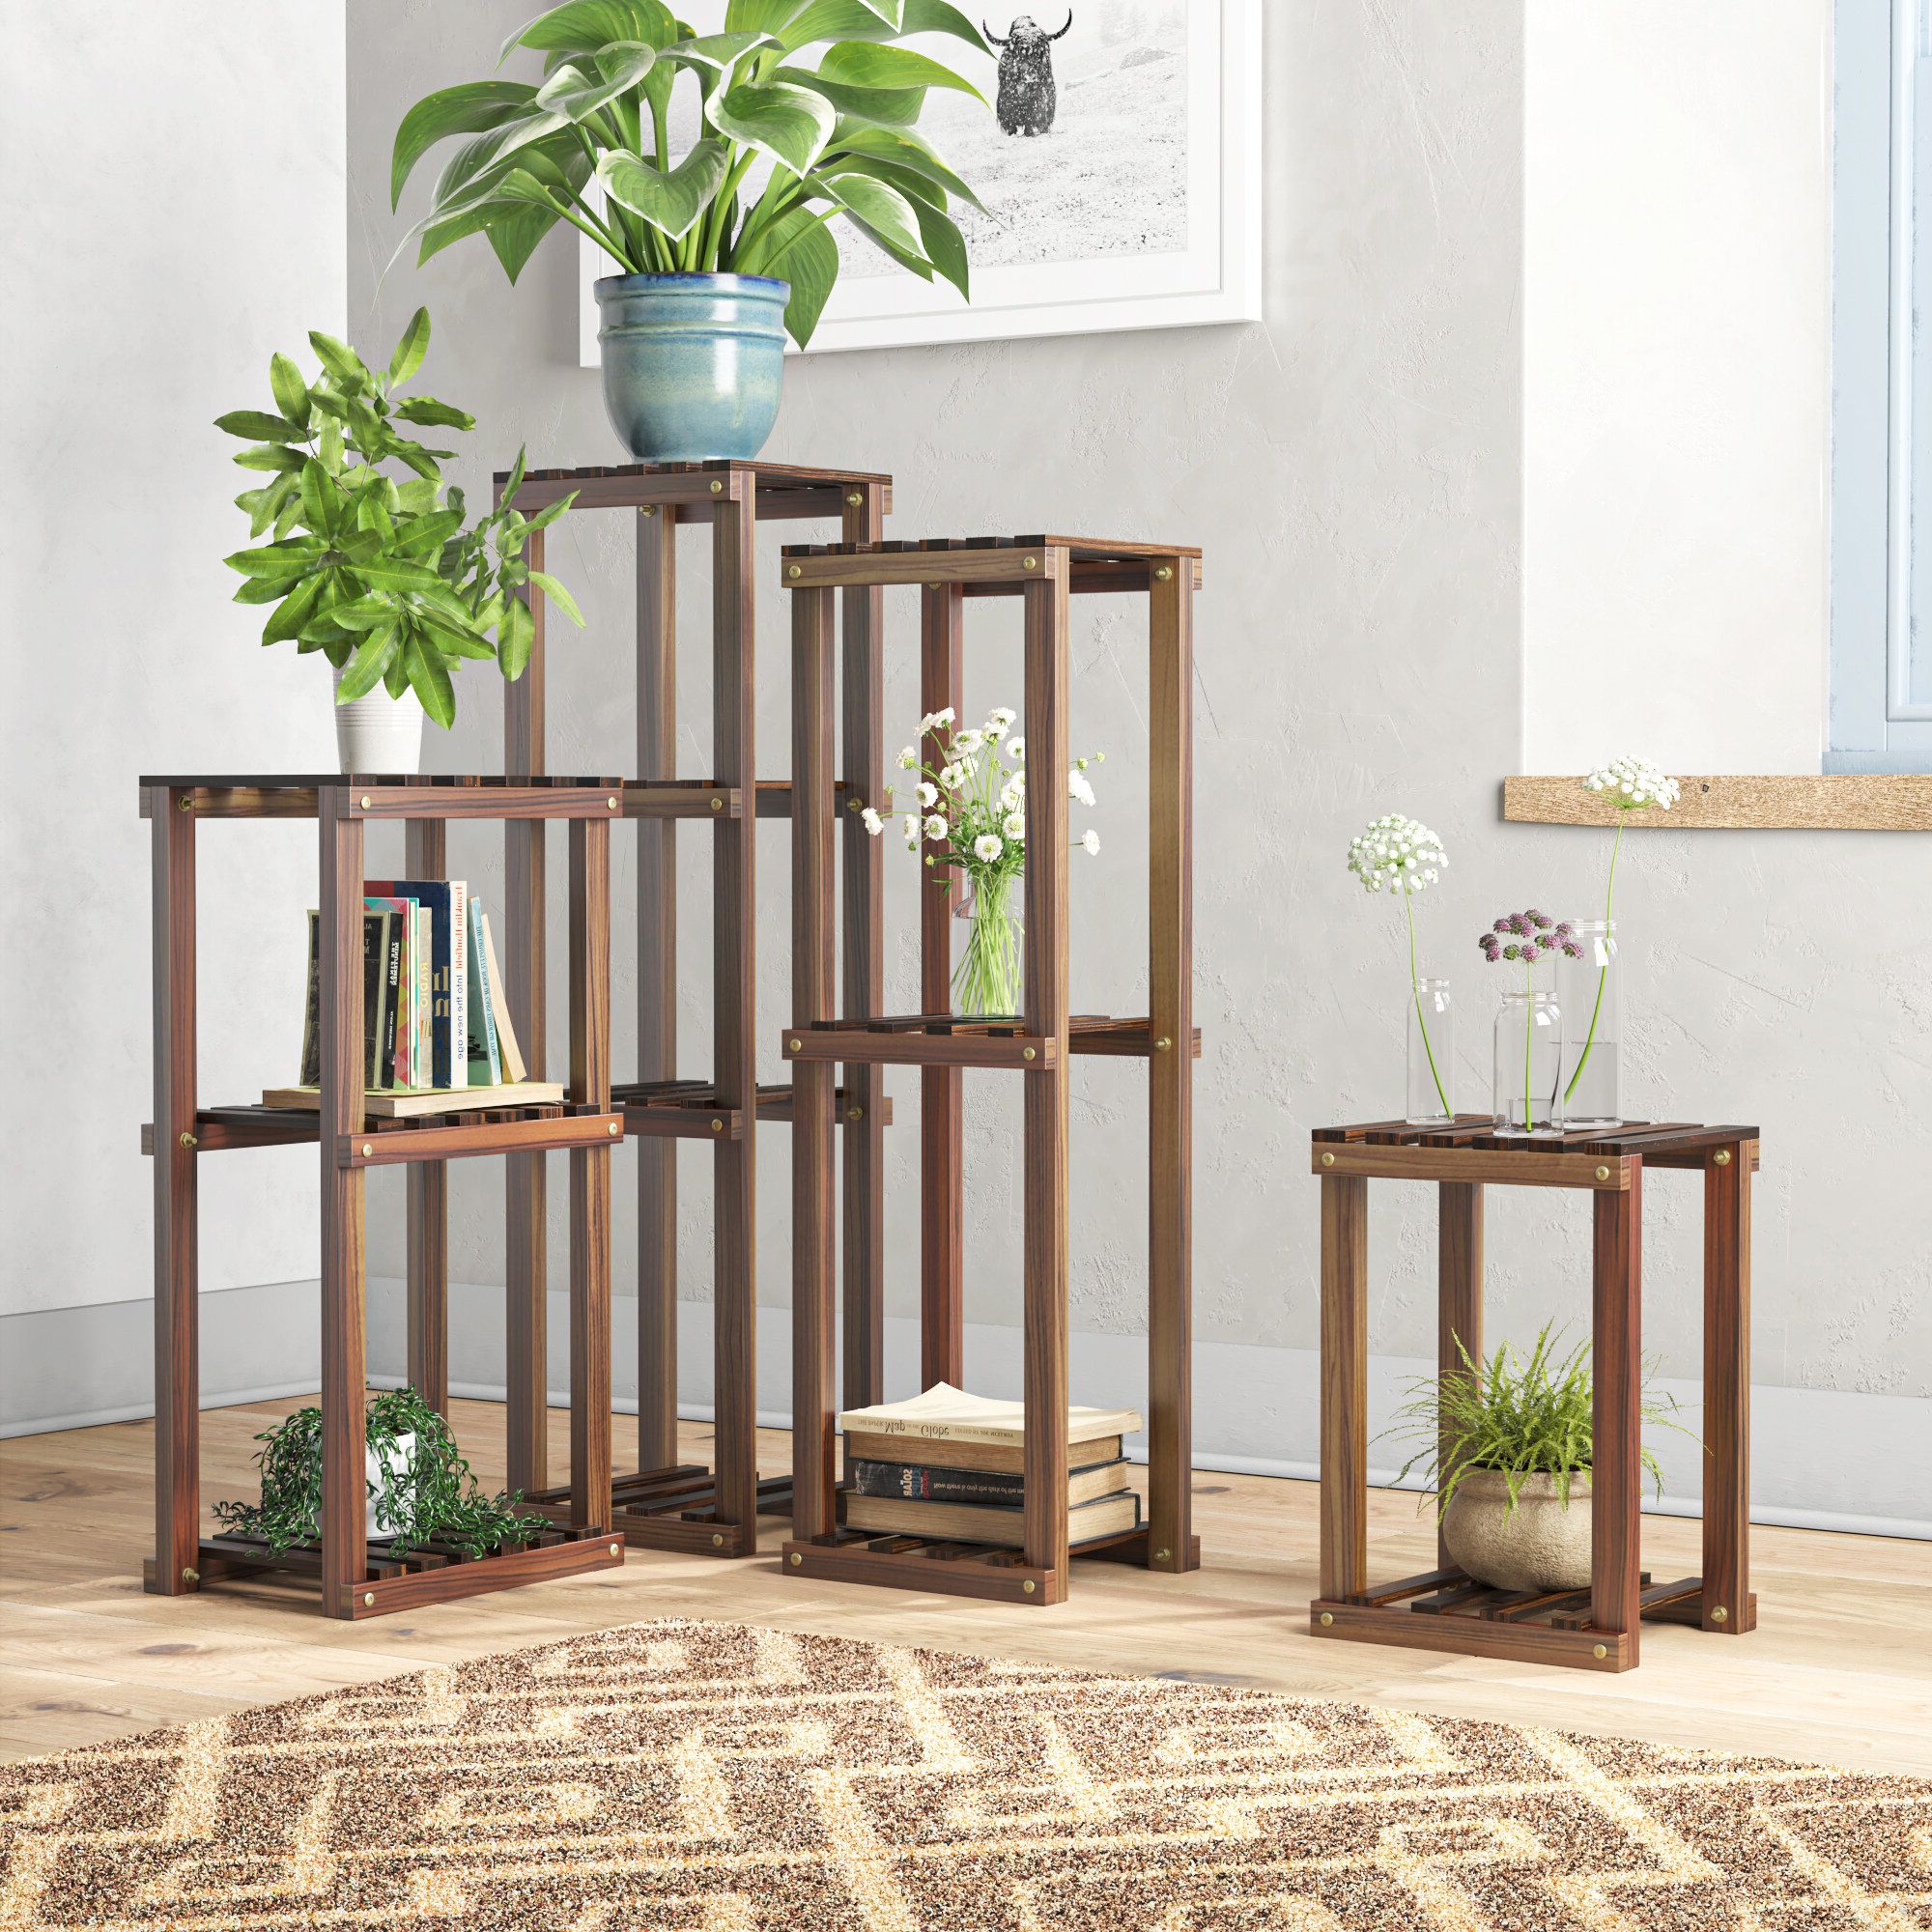 2020 Globe Plant Stands With Regard To Foundstone™ Joanie Nesting Solid Wood Plant Stand & Reviews (View 8 of 10)